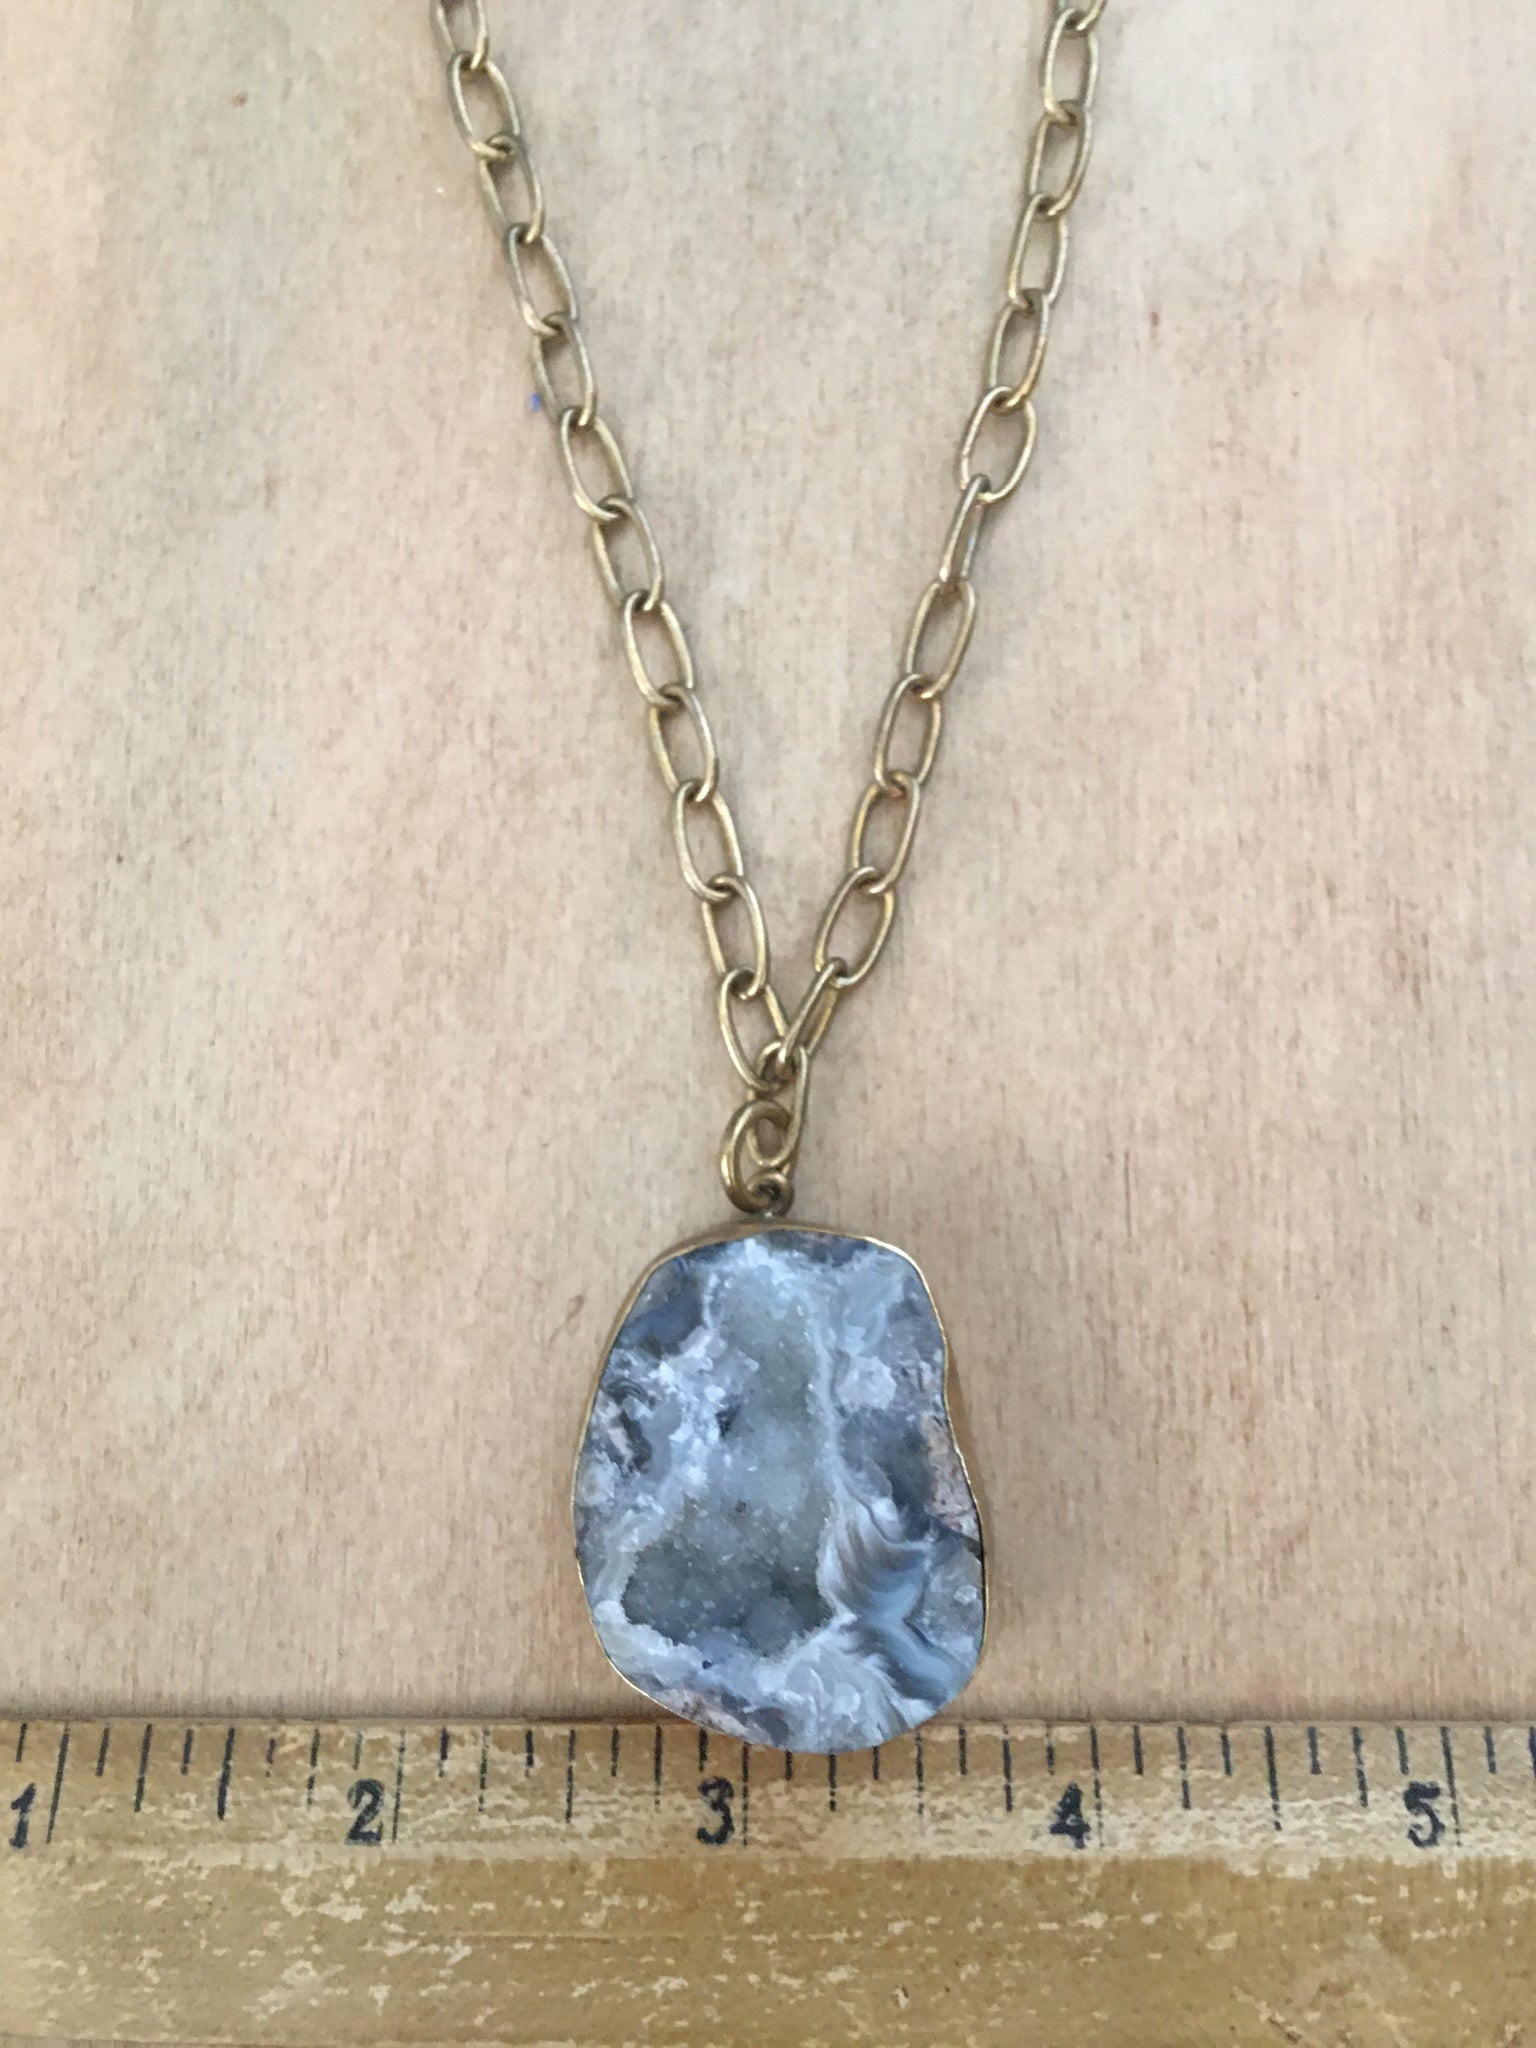 Chunky geode pendant on a 36” brass chain